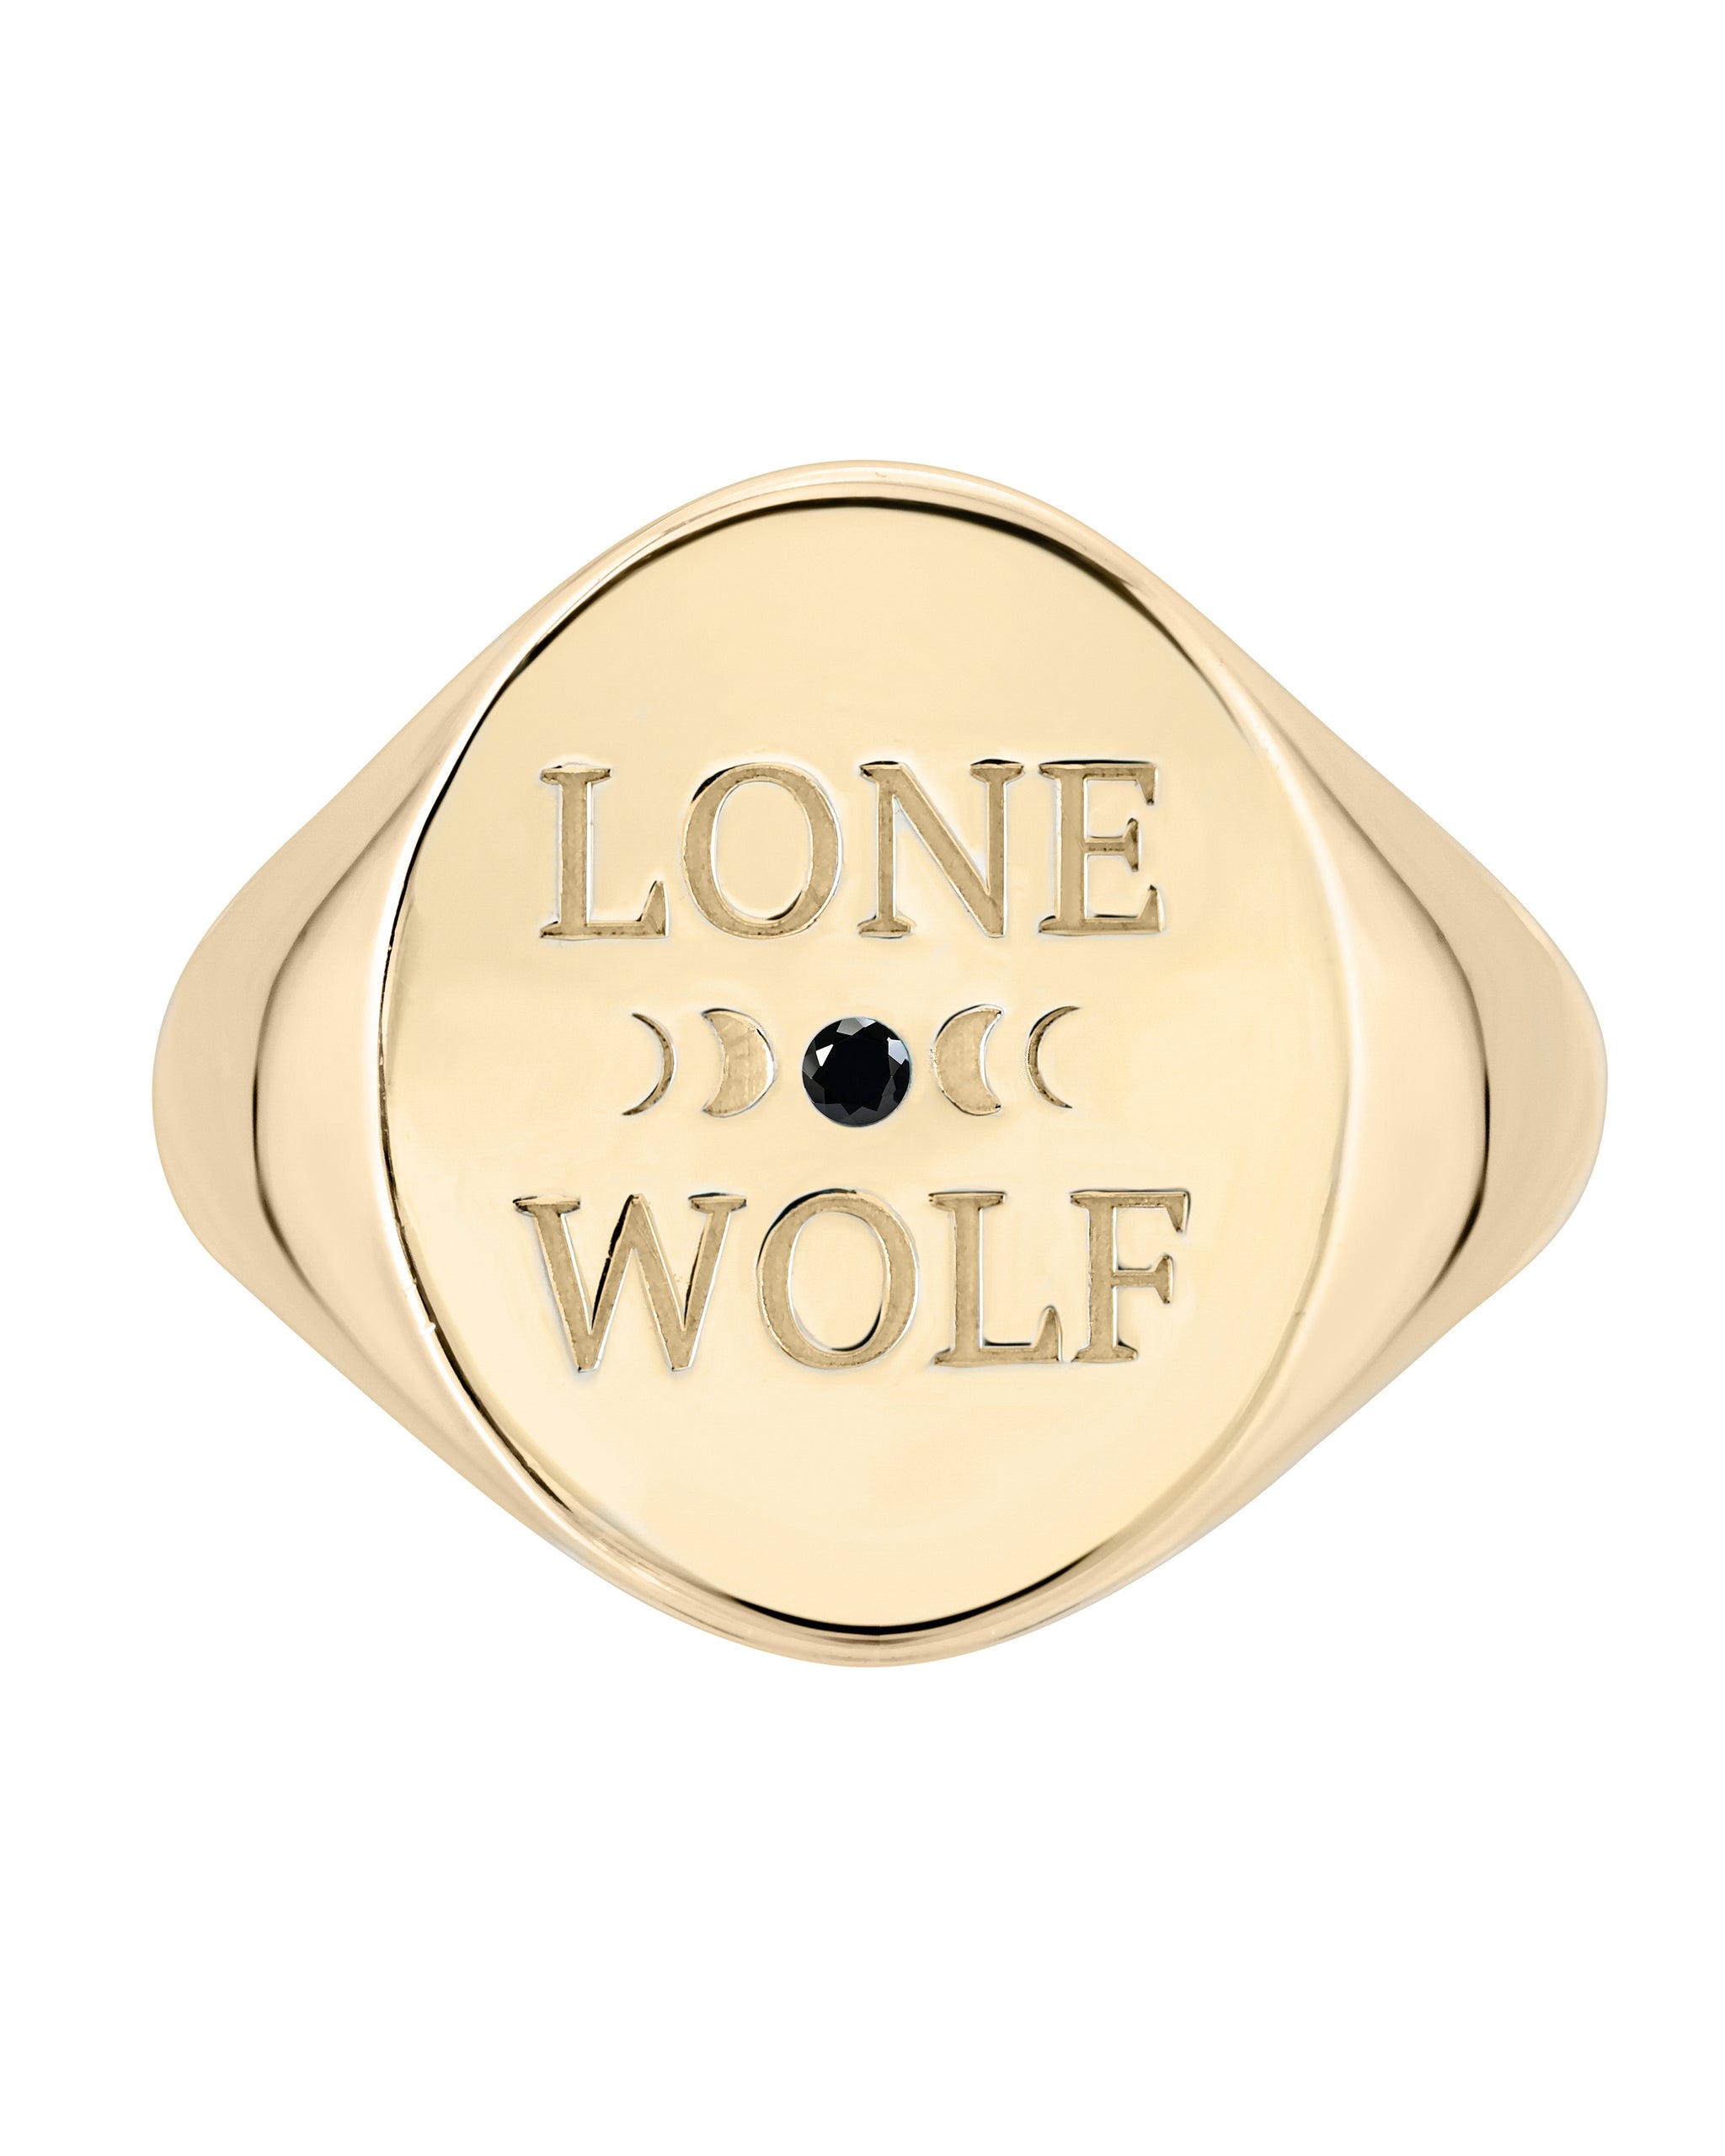 14k Yellow Gold Lone Wolf Signet Ring with an Onyx Stone